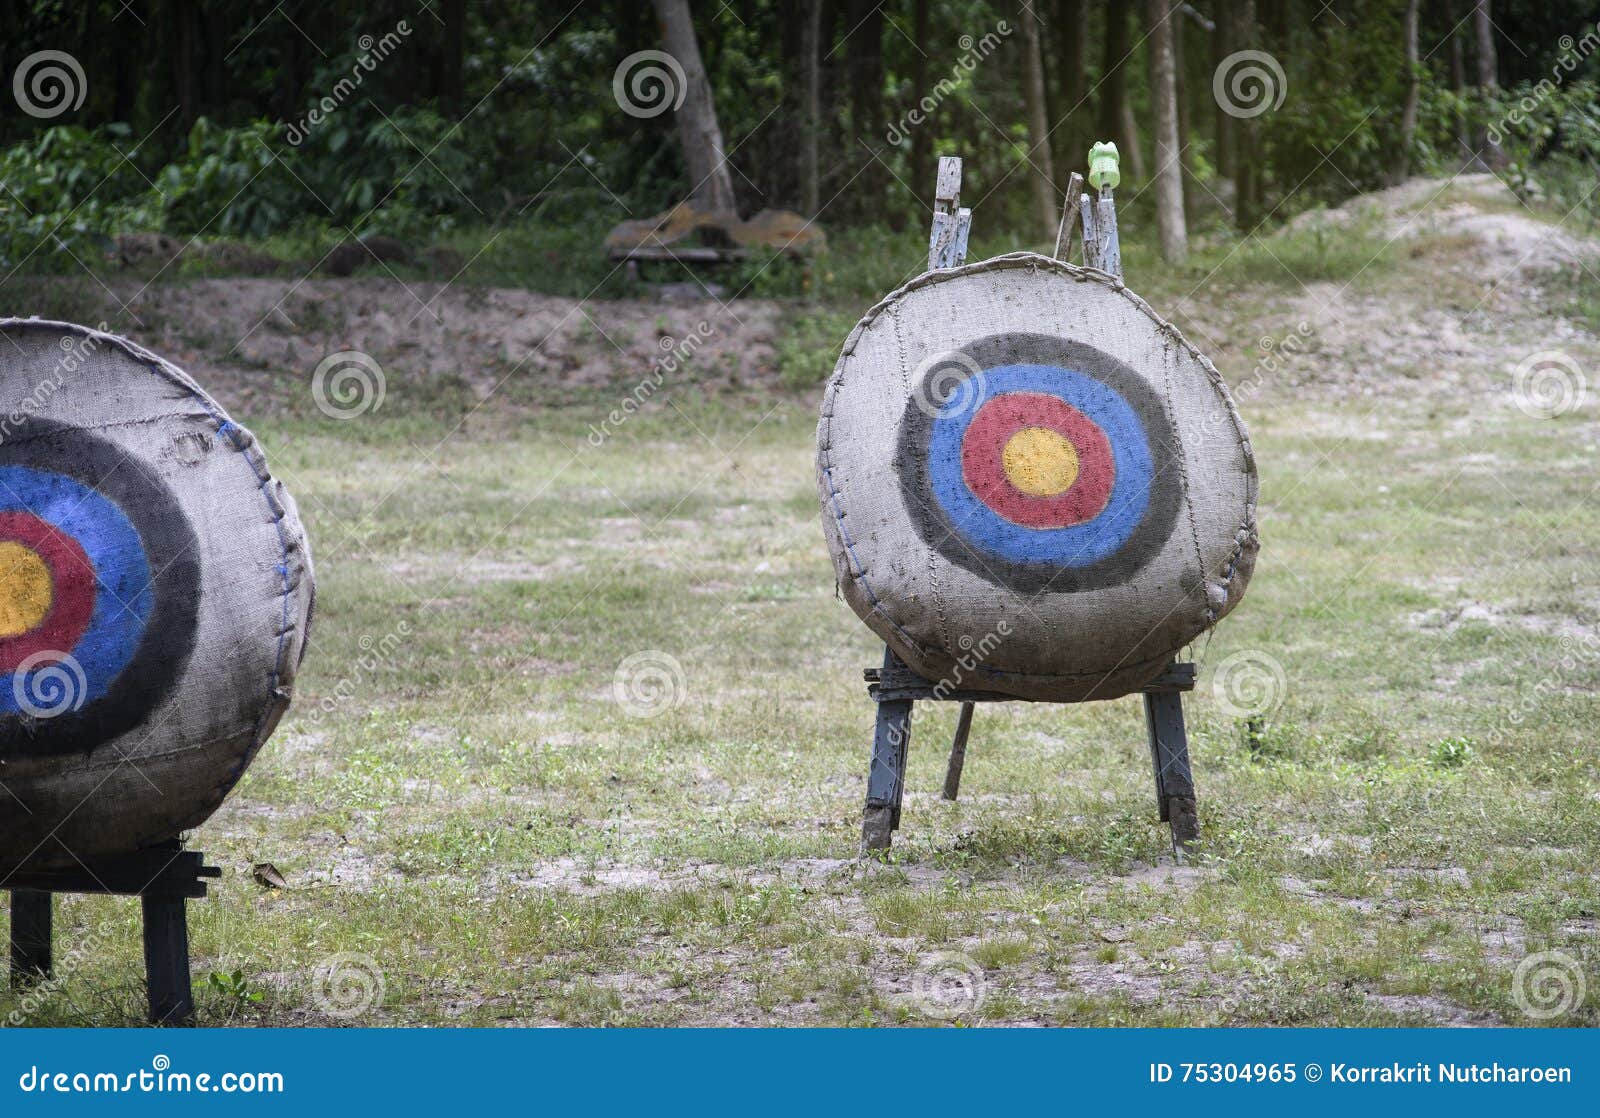 archery target on the field,light and flare effect added,mean Ã¢â¬Åchoose your goal,targetedÃ¢â¬Â,Ã¢â¬Âsuccess life goalsÃ¢â¬Â